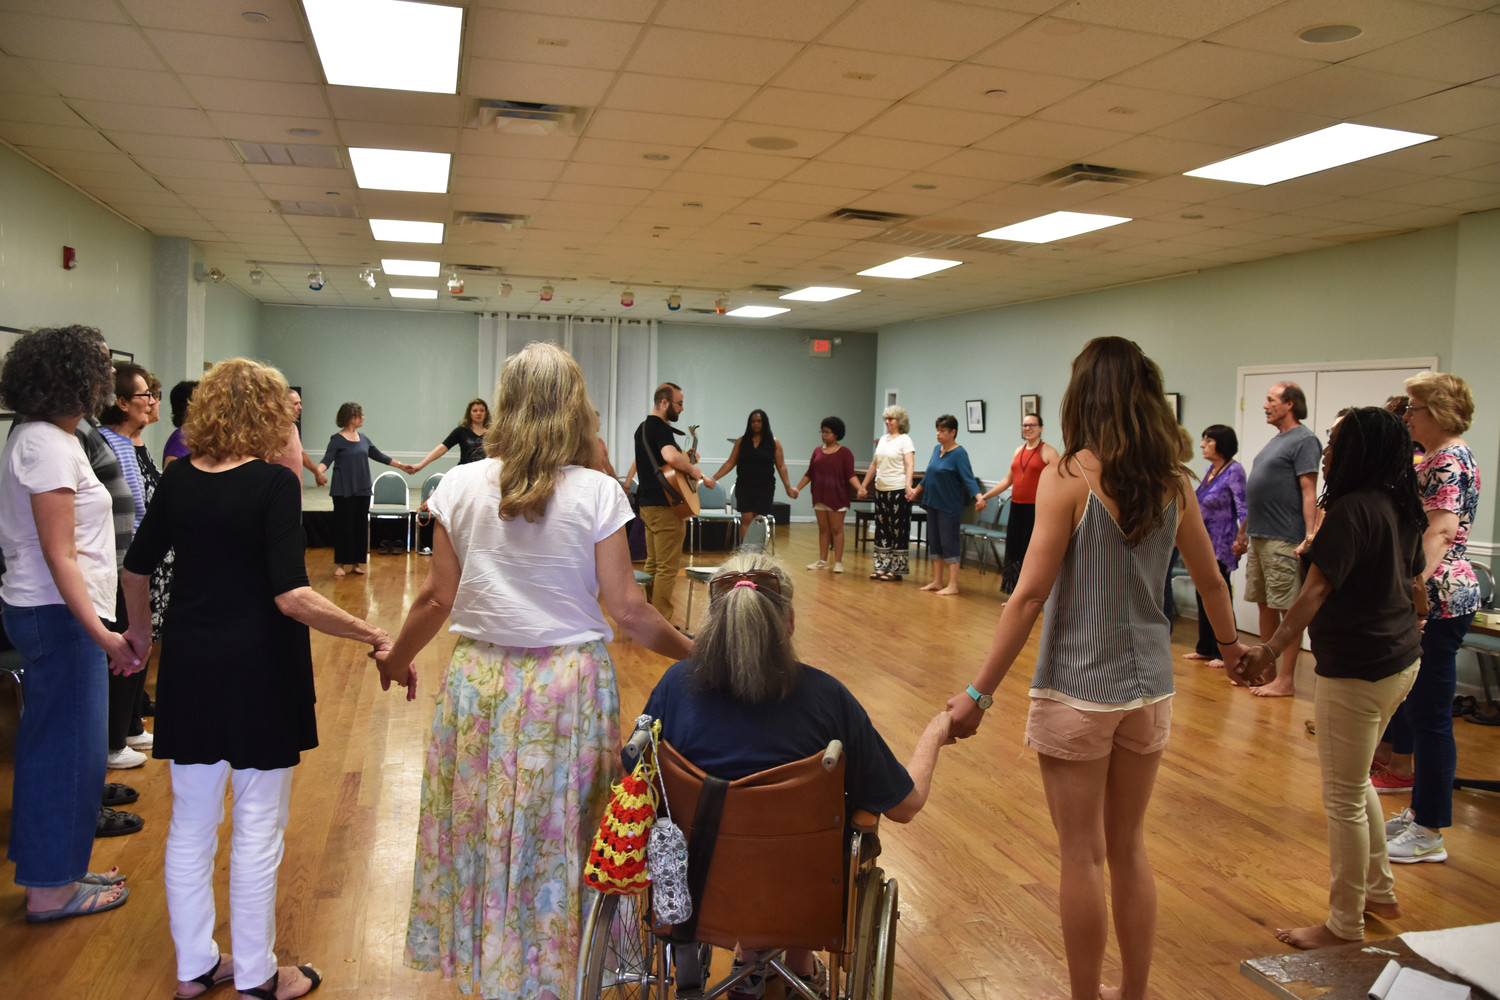 About 50 people turned out for the Baha’i Center’s first ever Dances of Universal Peace on June 9.